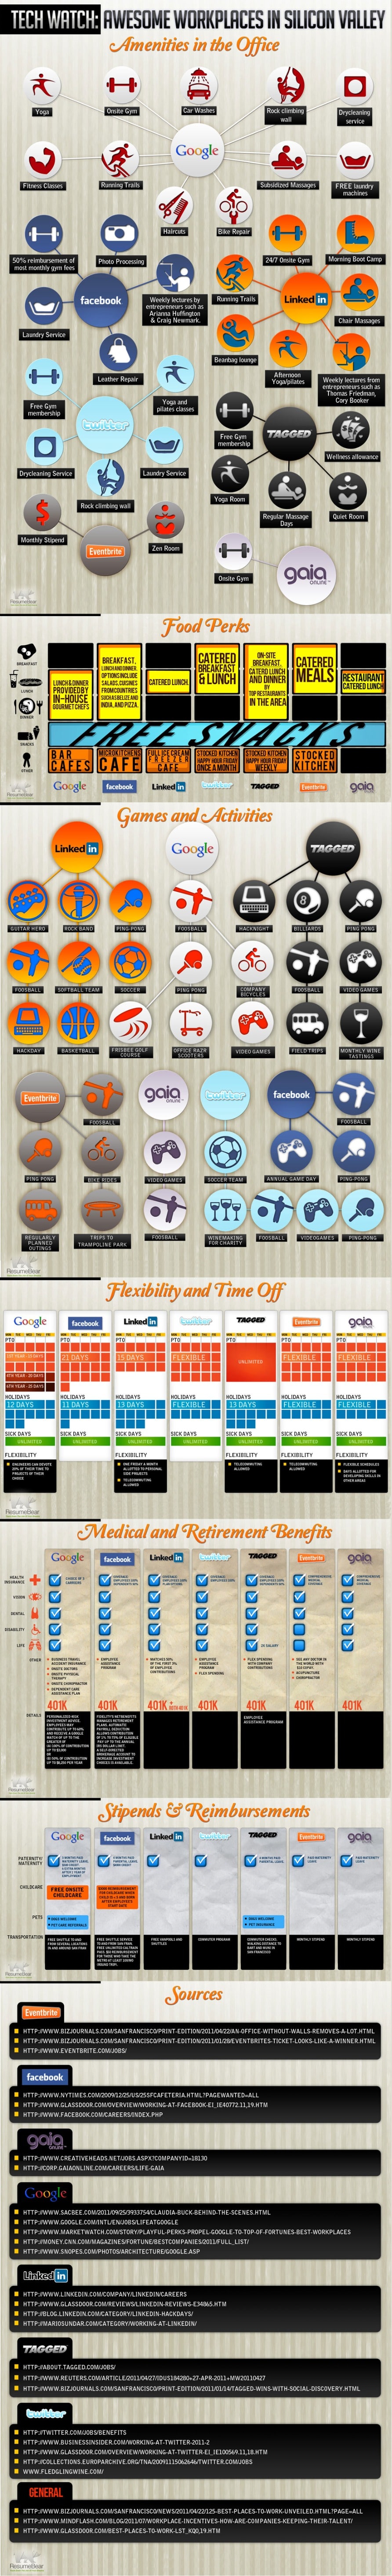 Social Networking Company Perks Infographic